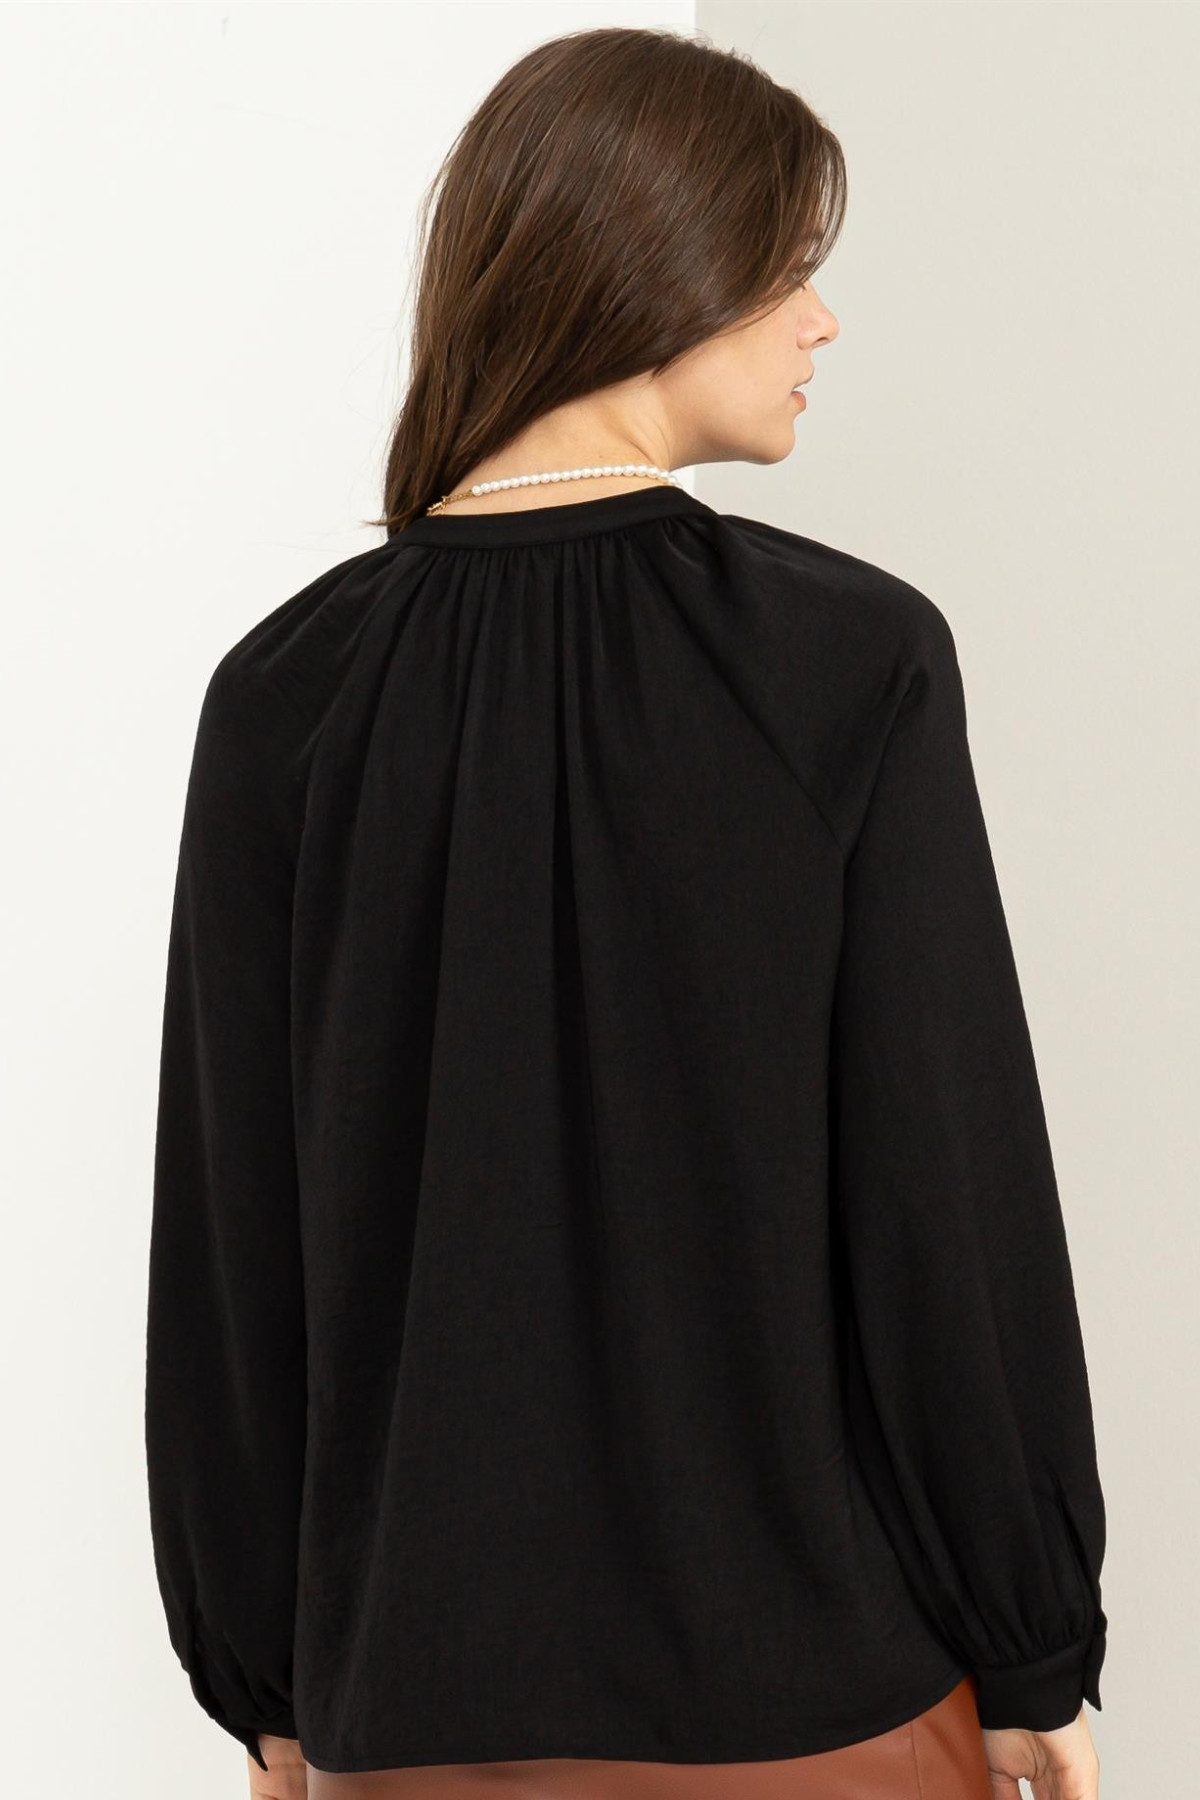 Essencial Chic Long Sleeve Ruffled Blouse